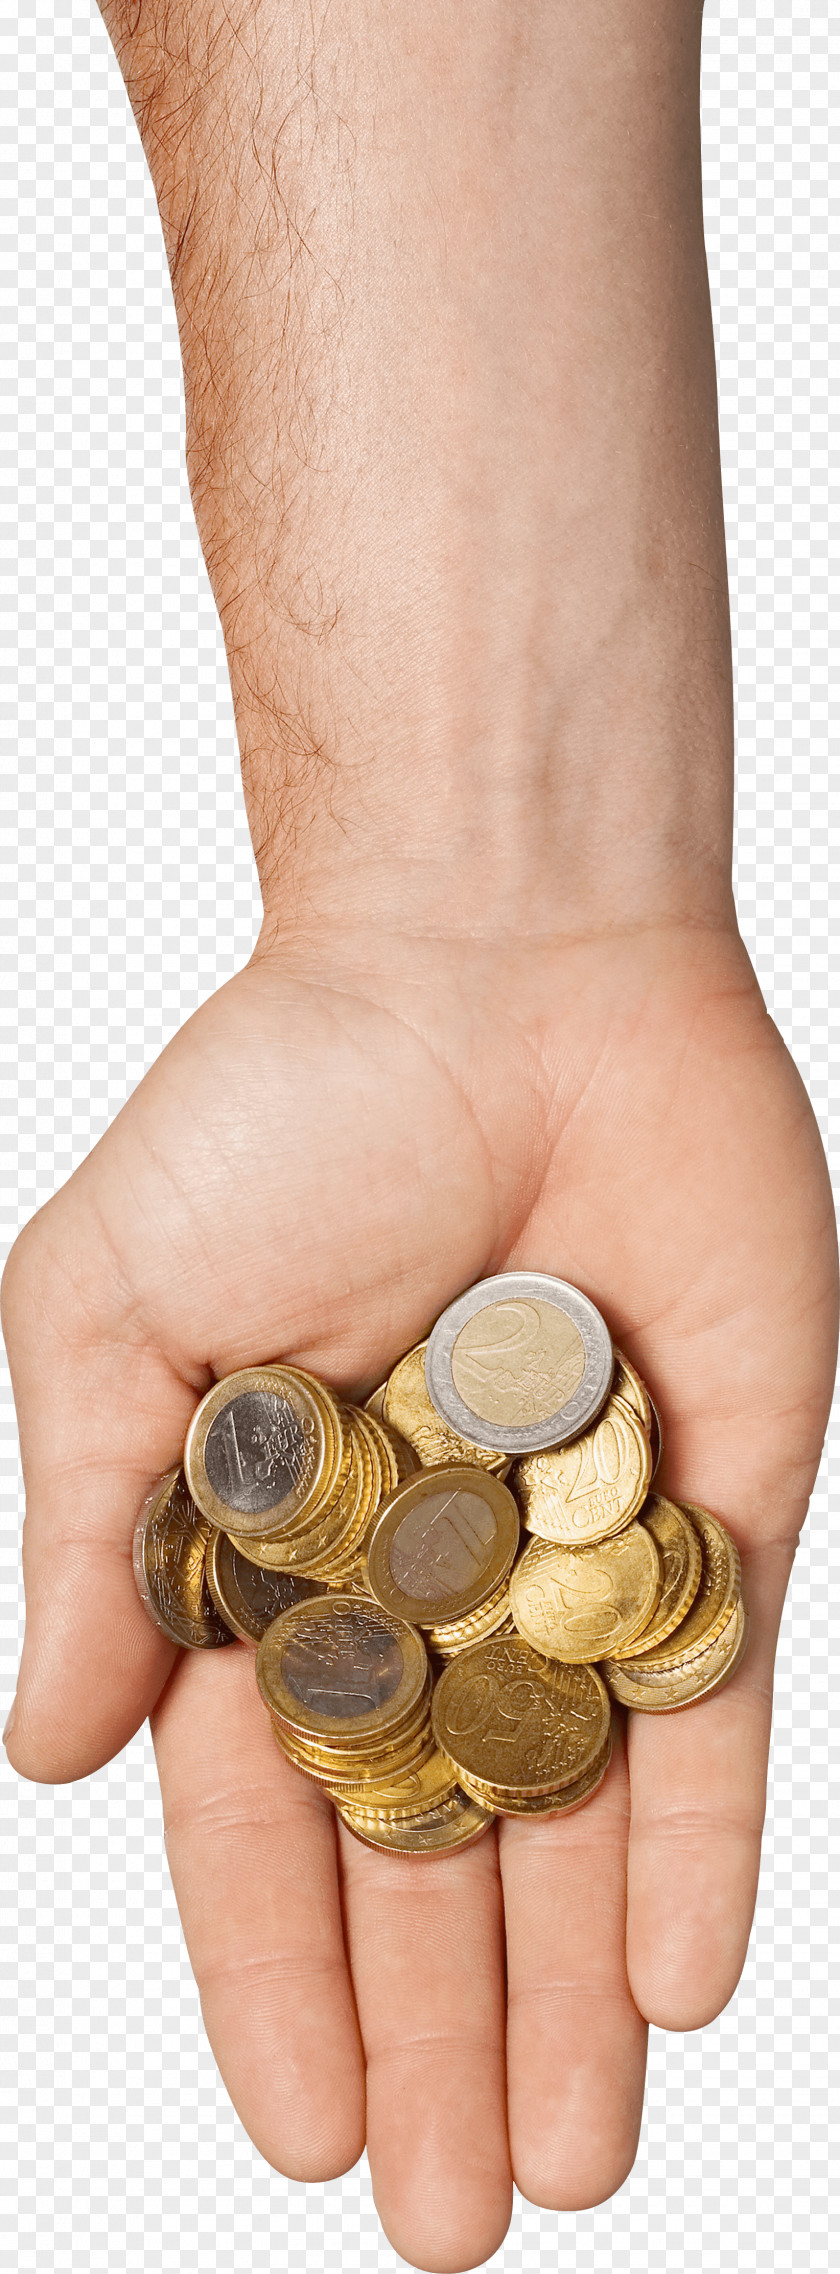 Coins In Hand Image Money Coin PNG